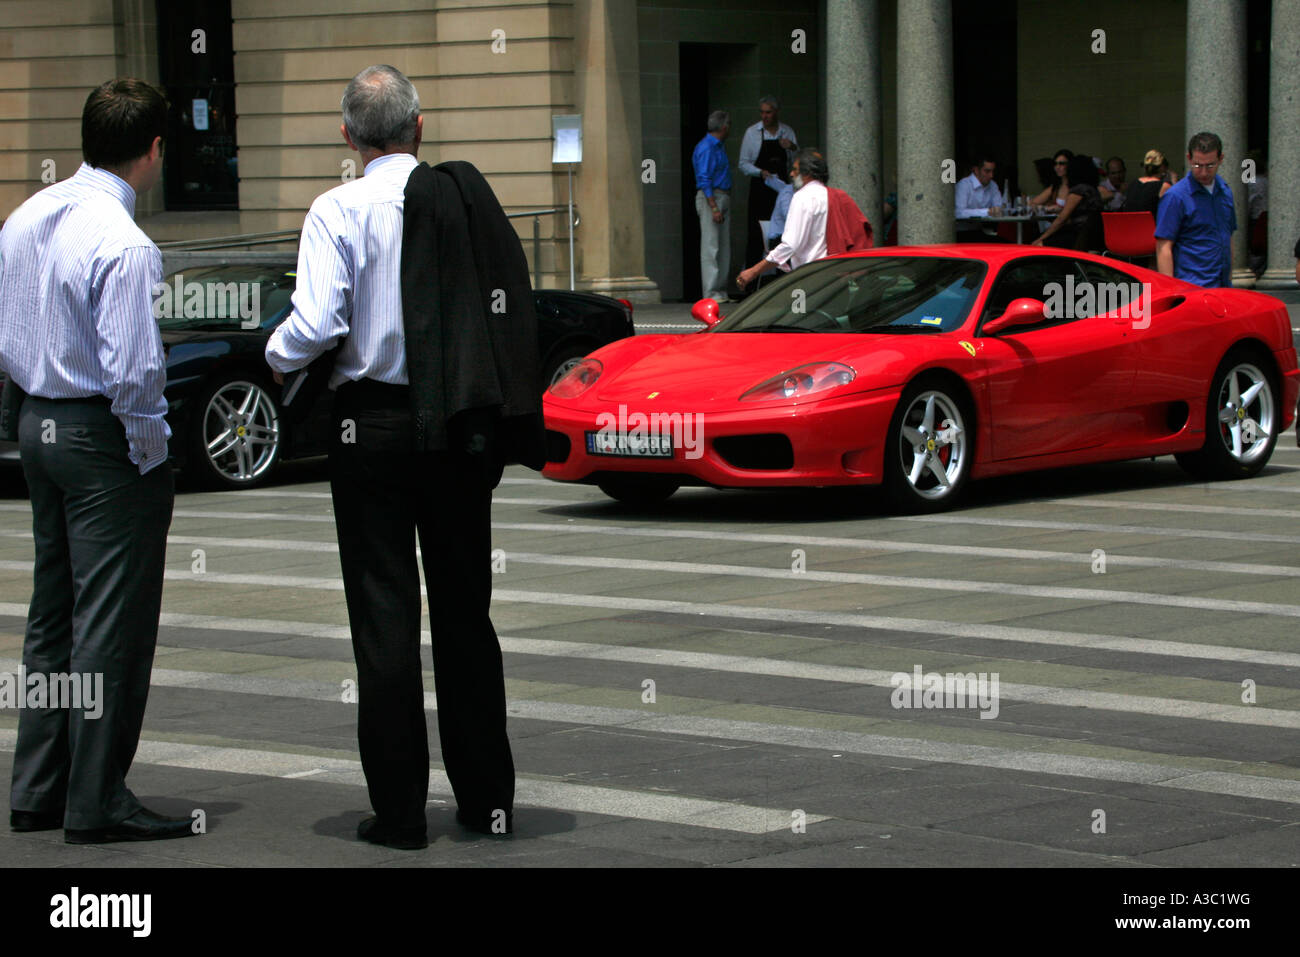 Businessmen and passersby inspect a Red Ferrari on display outside the Customs house in Sydney Australia Stock Photo